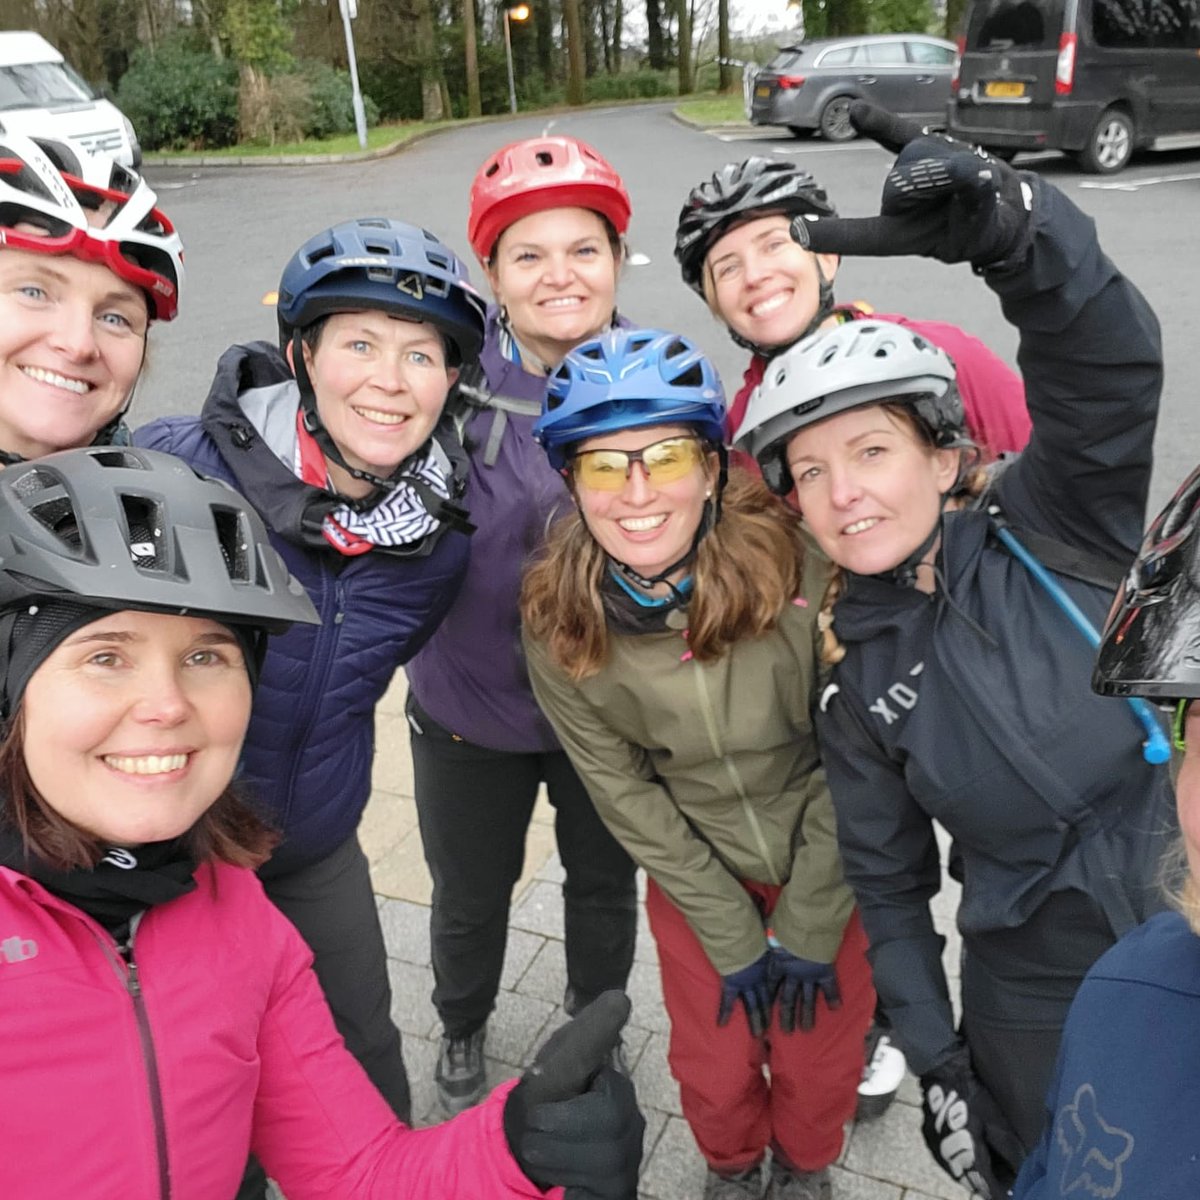 On #internationalwomensday here's to all the #fiercewomen encouraging & empowering other #fiercewomen.. We've got this 💪. This time last year everyone of these women became qualified MTB Trail Leaders #wearelegion #ridelikeagirl #GirlsOnBikesAreClass #lifebehindbars